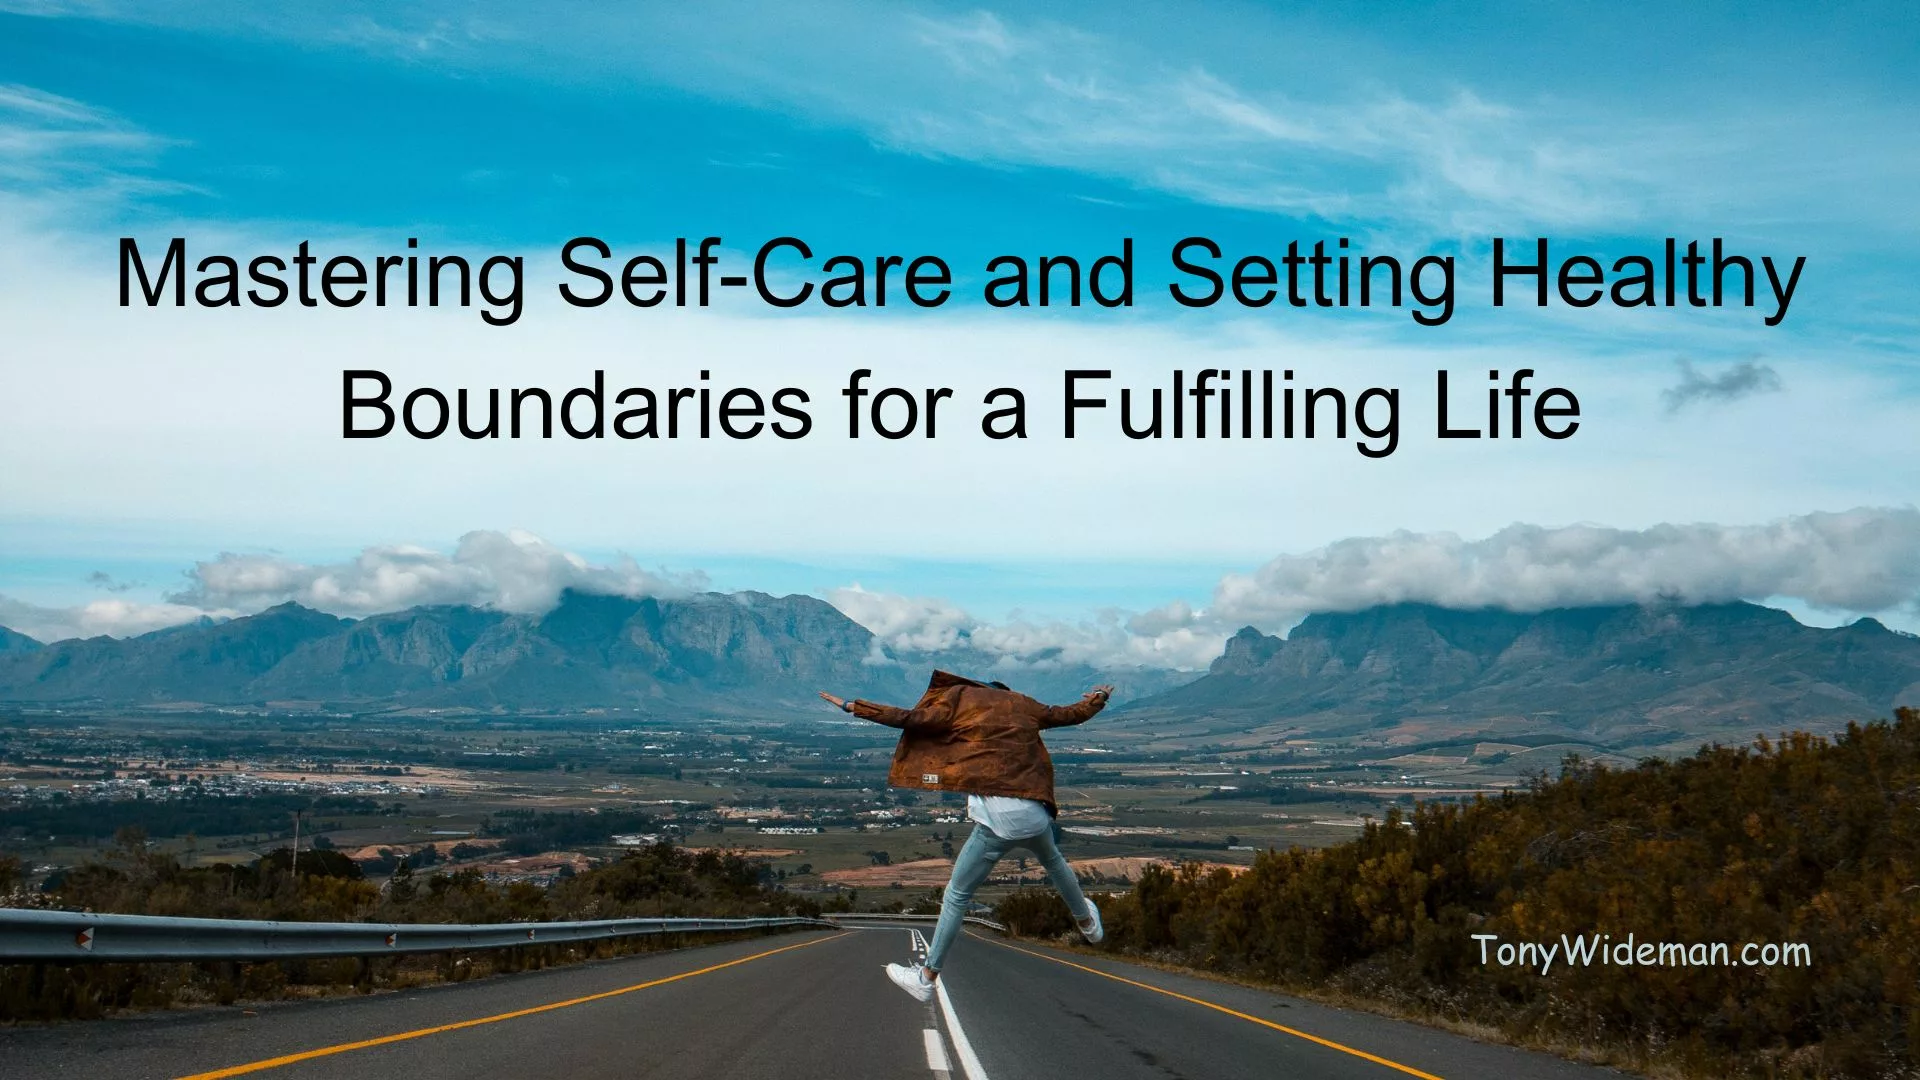 Mastering Self-Care and Setting Healthy Boundaries for a Fulfilling Life